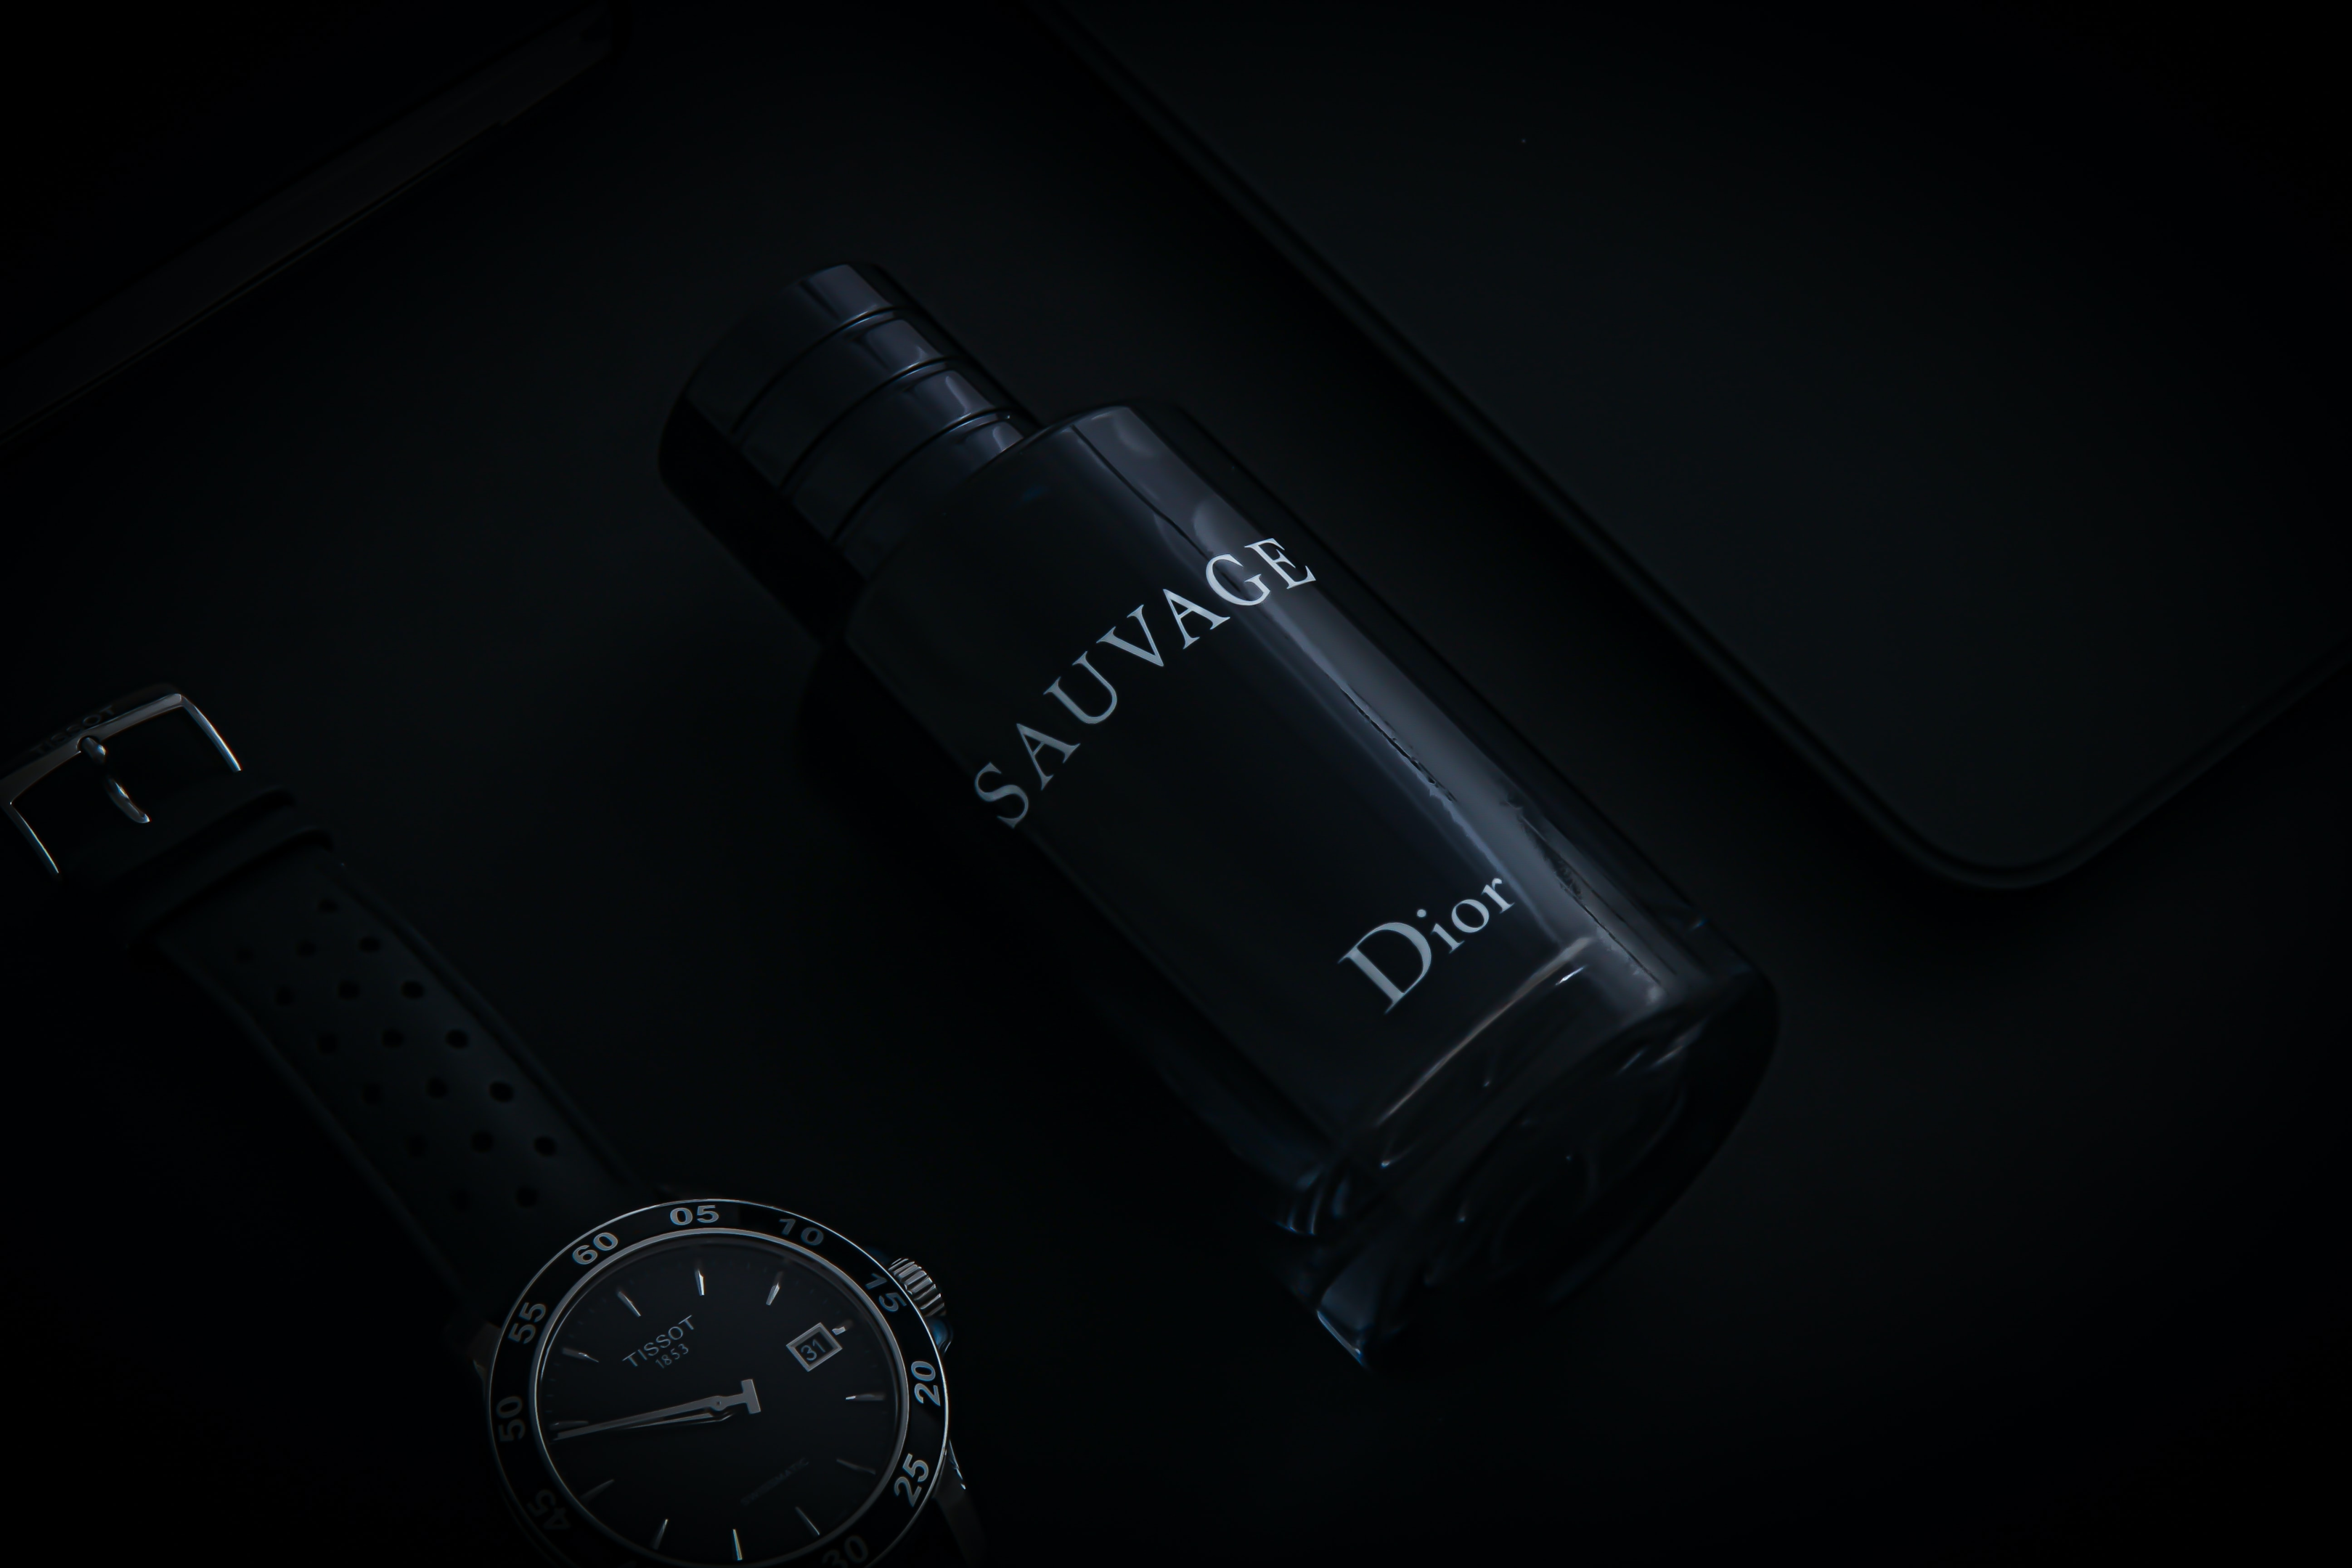 The new Dior Homme is made by Dior in-house perfumer to redefine masculine sensuality | Photo by Brandon Romanchuk from Unsplash 